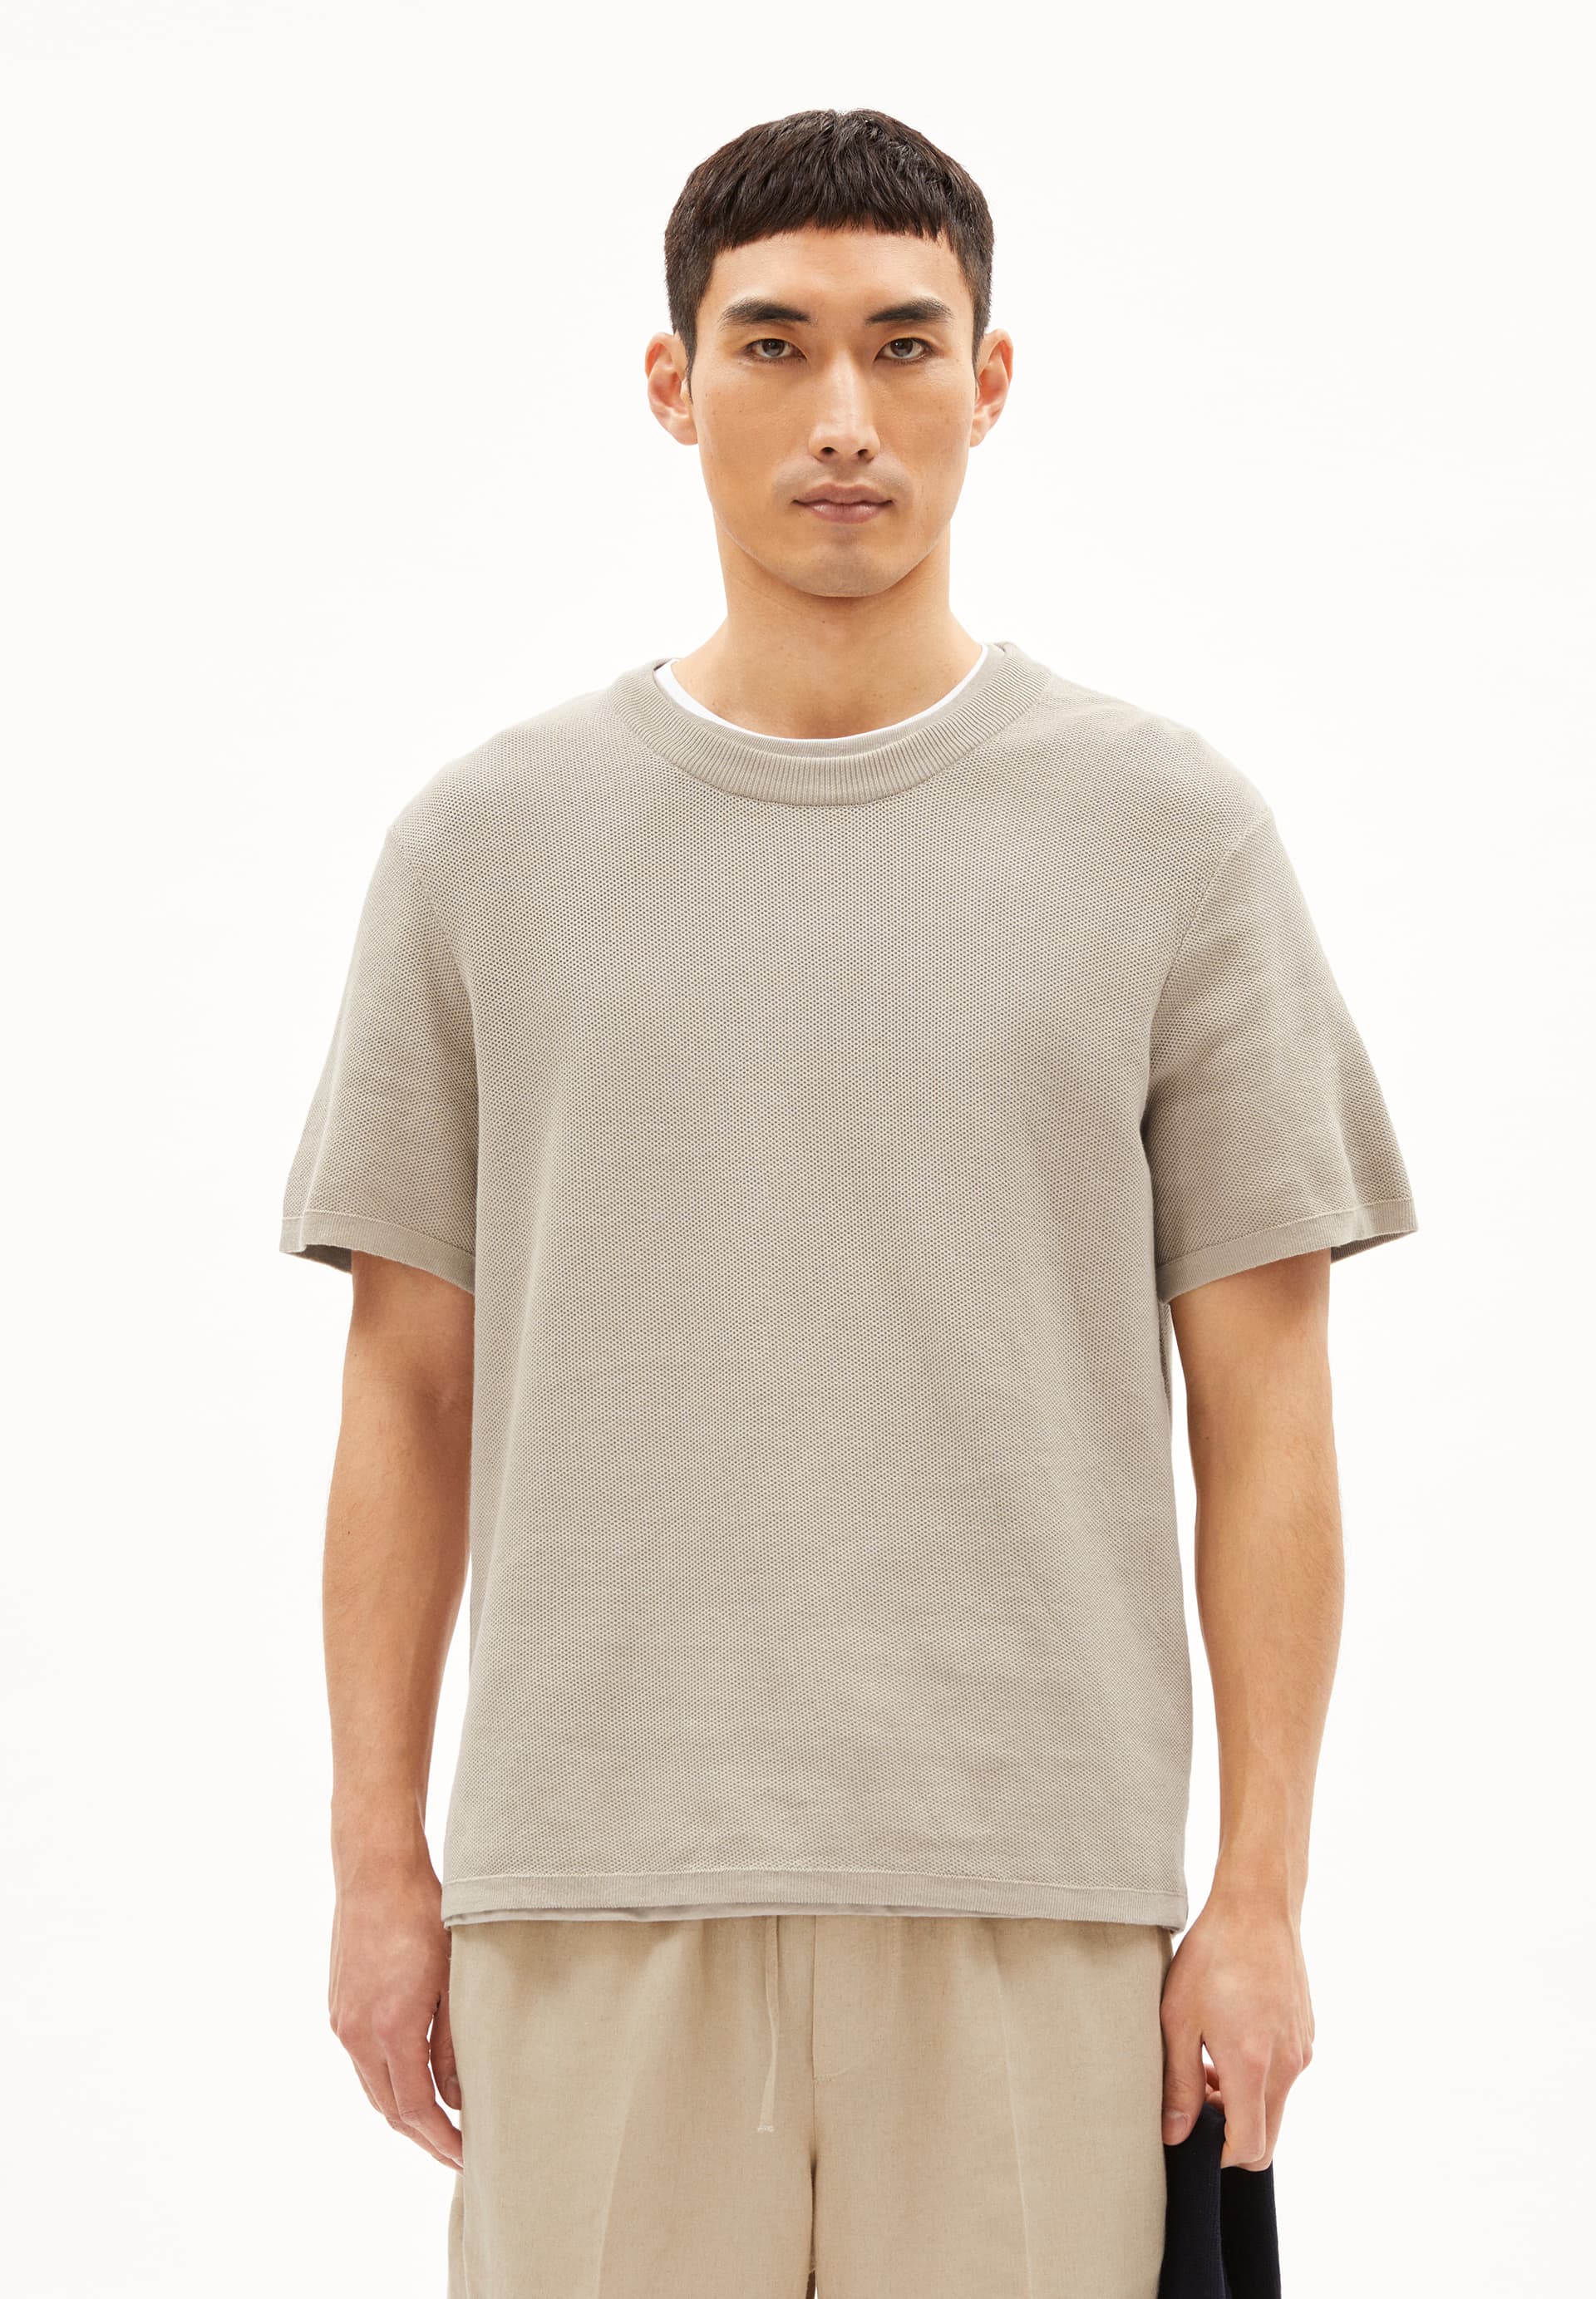 ERWAAN Sweater Relaxed Fit made of Organic Cotton